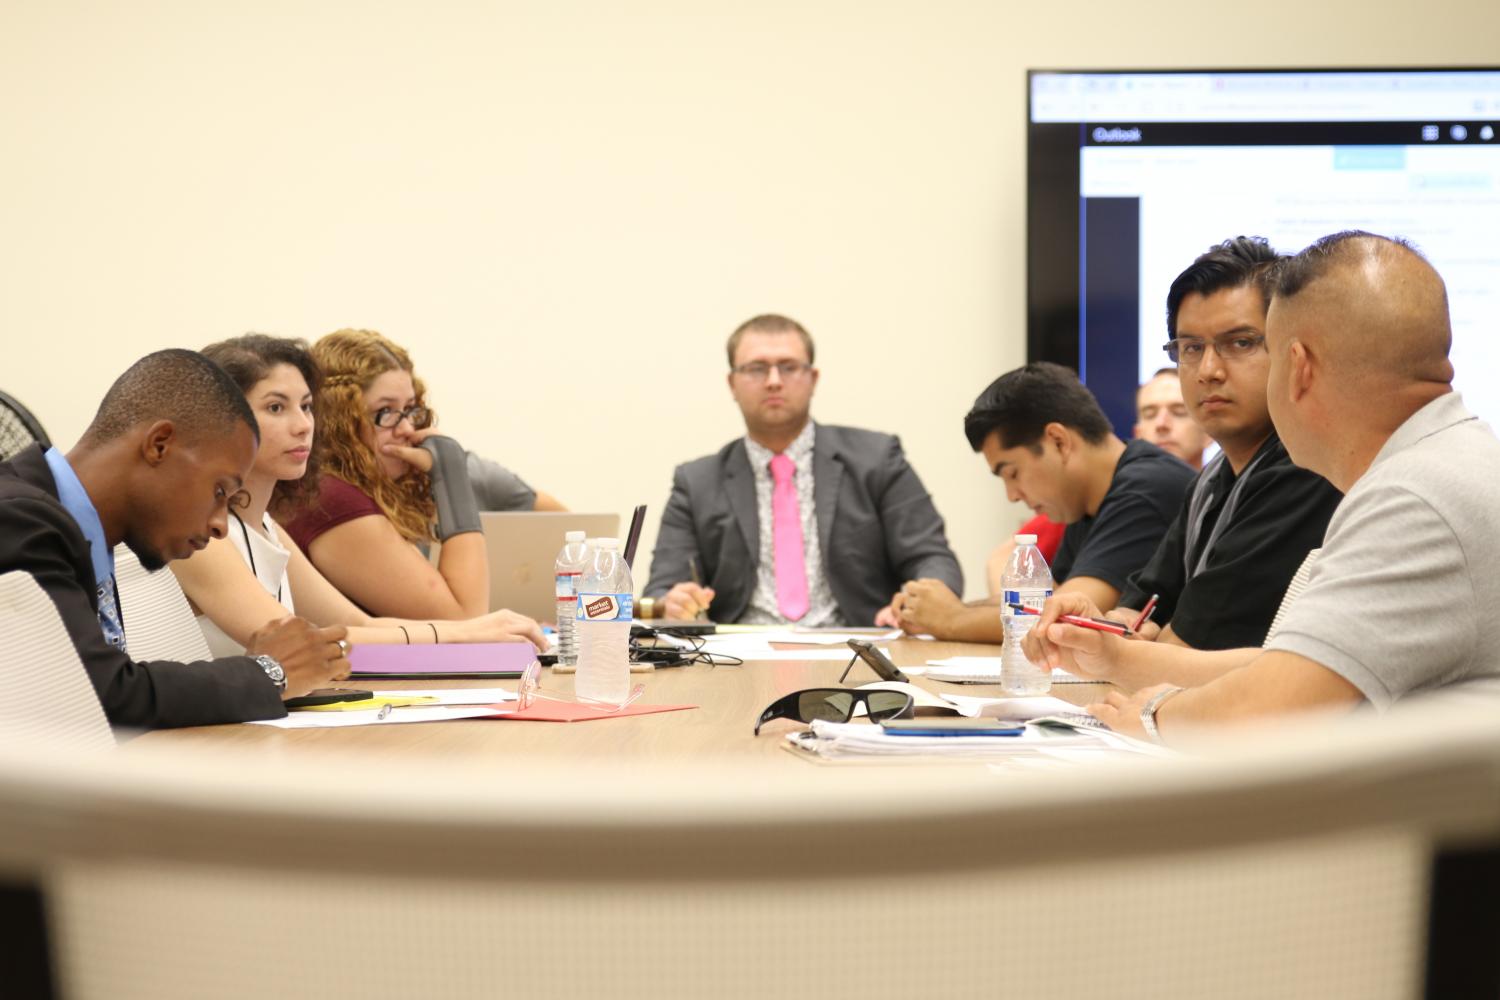 Associated Student Government attending thier first meeting of the semester. This meeting was reserved for students to address the Associated Student Senate on any concerns theyve had. Held at the Student Chambers on Tuesday, Aug 29, 2017.